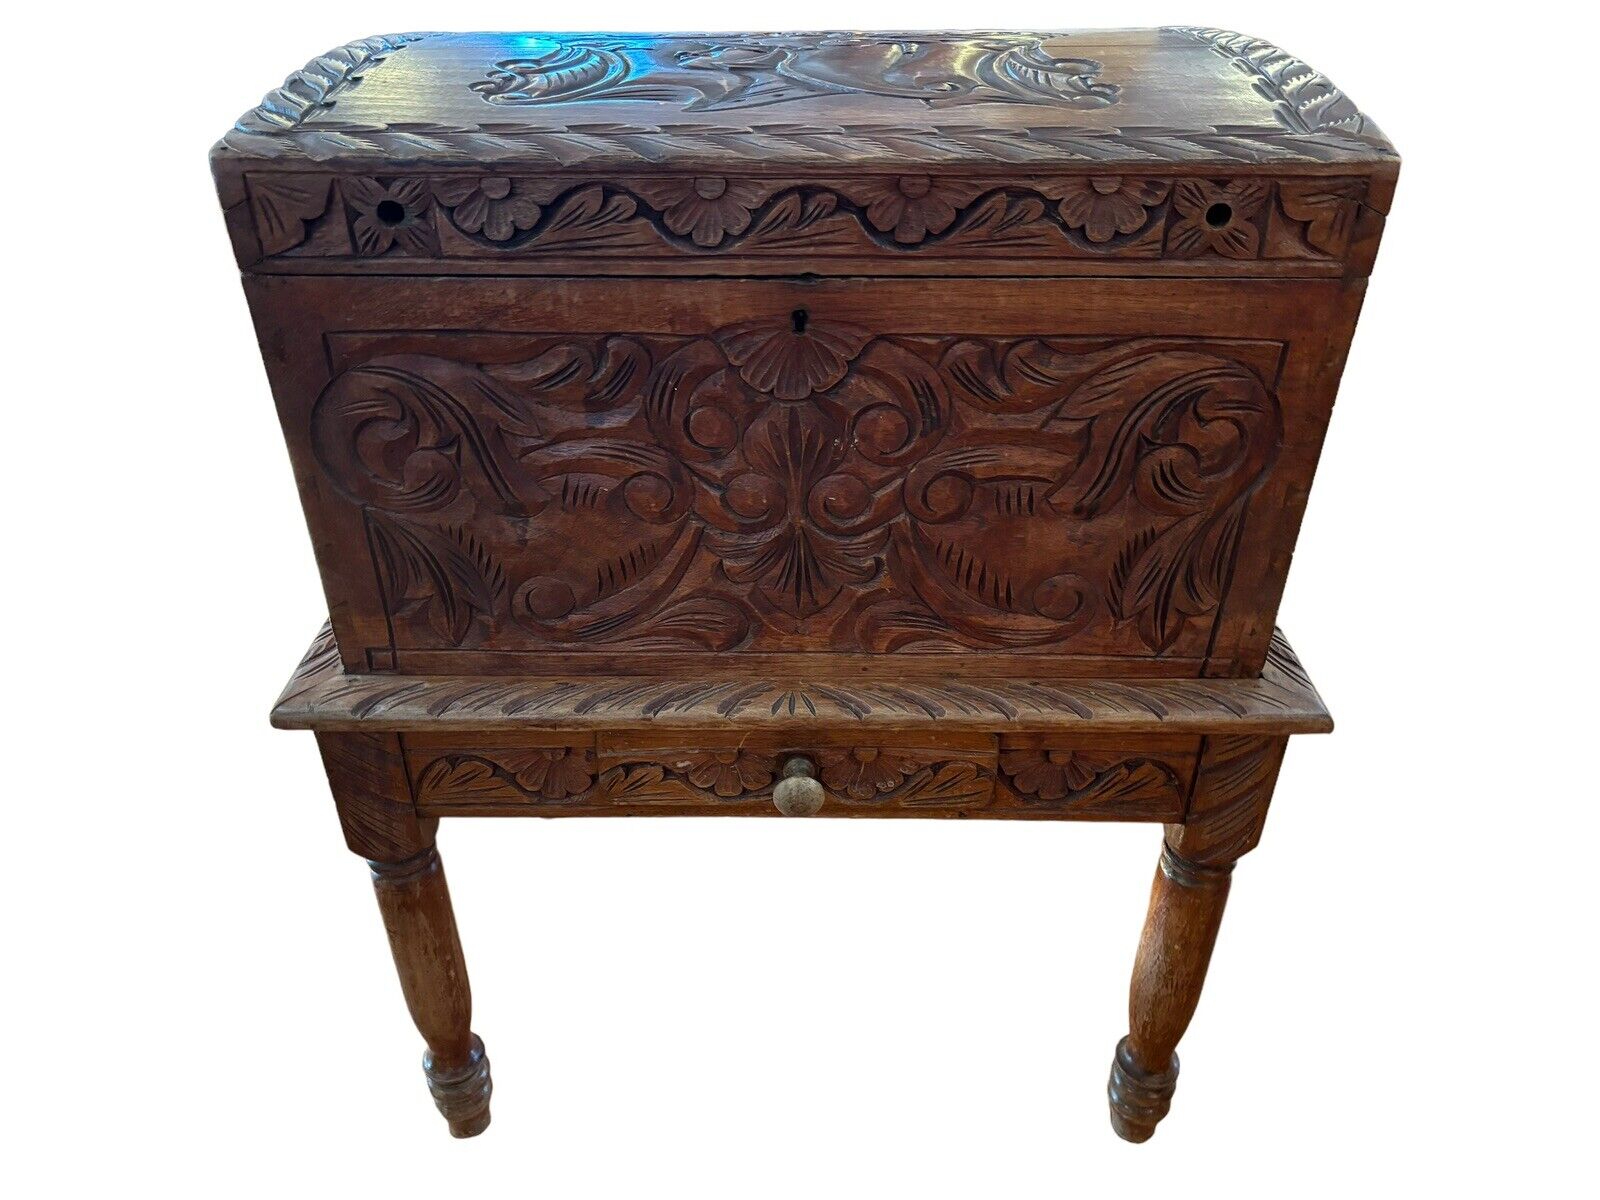 European Carved Wood Box On Stand